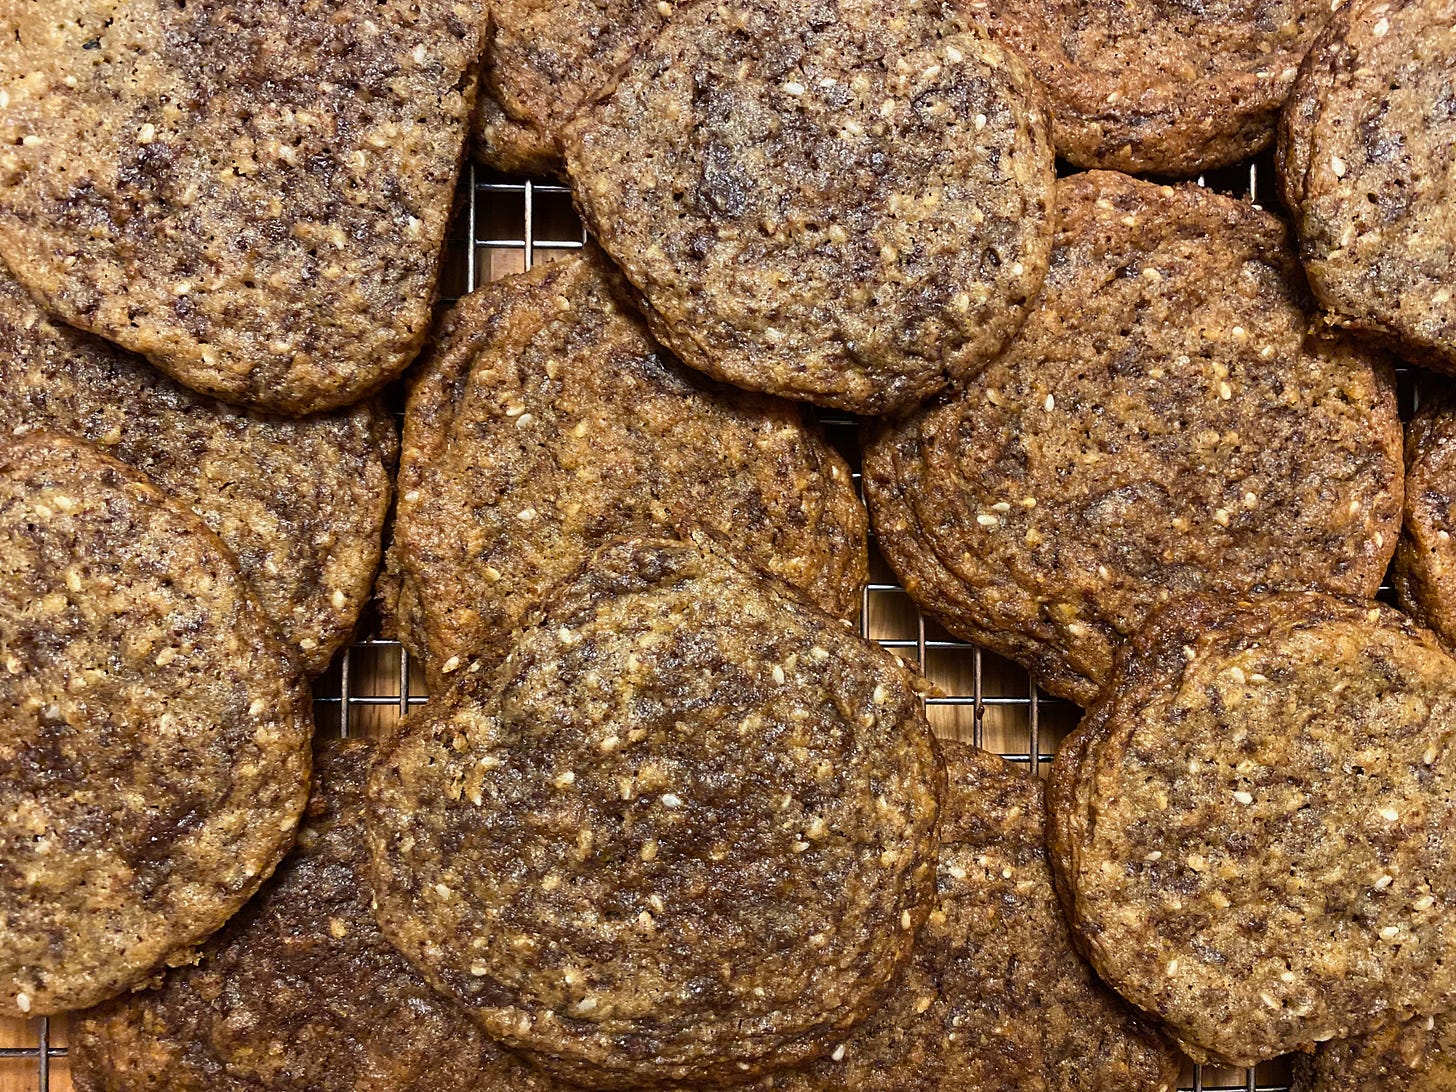 A close-up of a pile of round, crinkly chocolate chip cookies on a metal cooling rack. They are golden brown and studded with sesame seeds and chunks of chocolate.